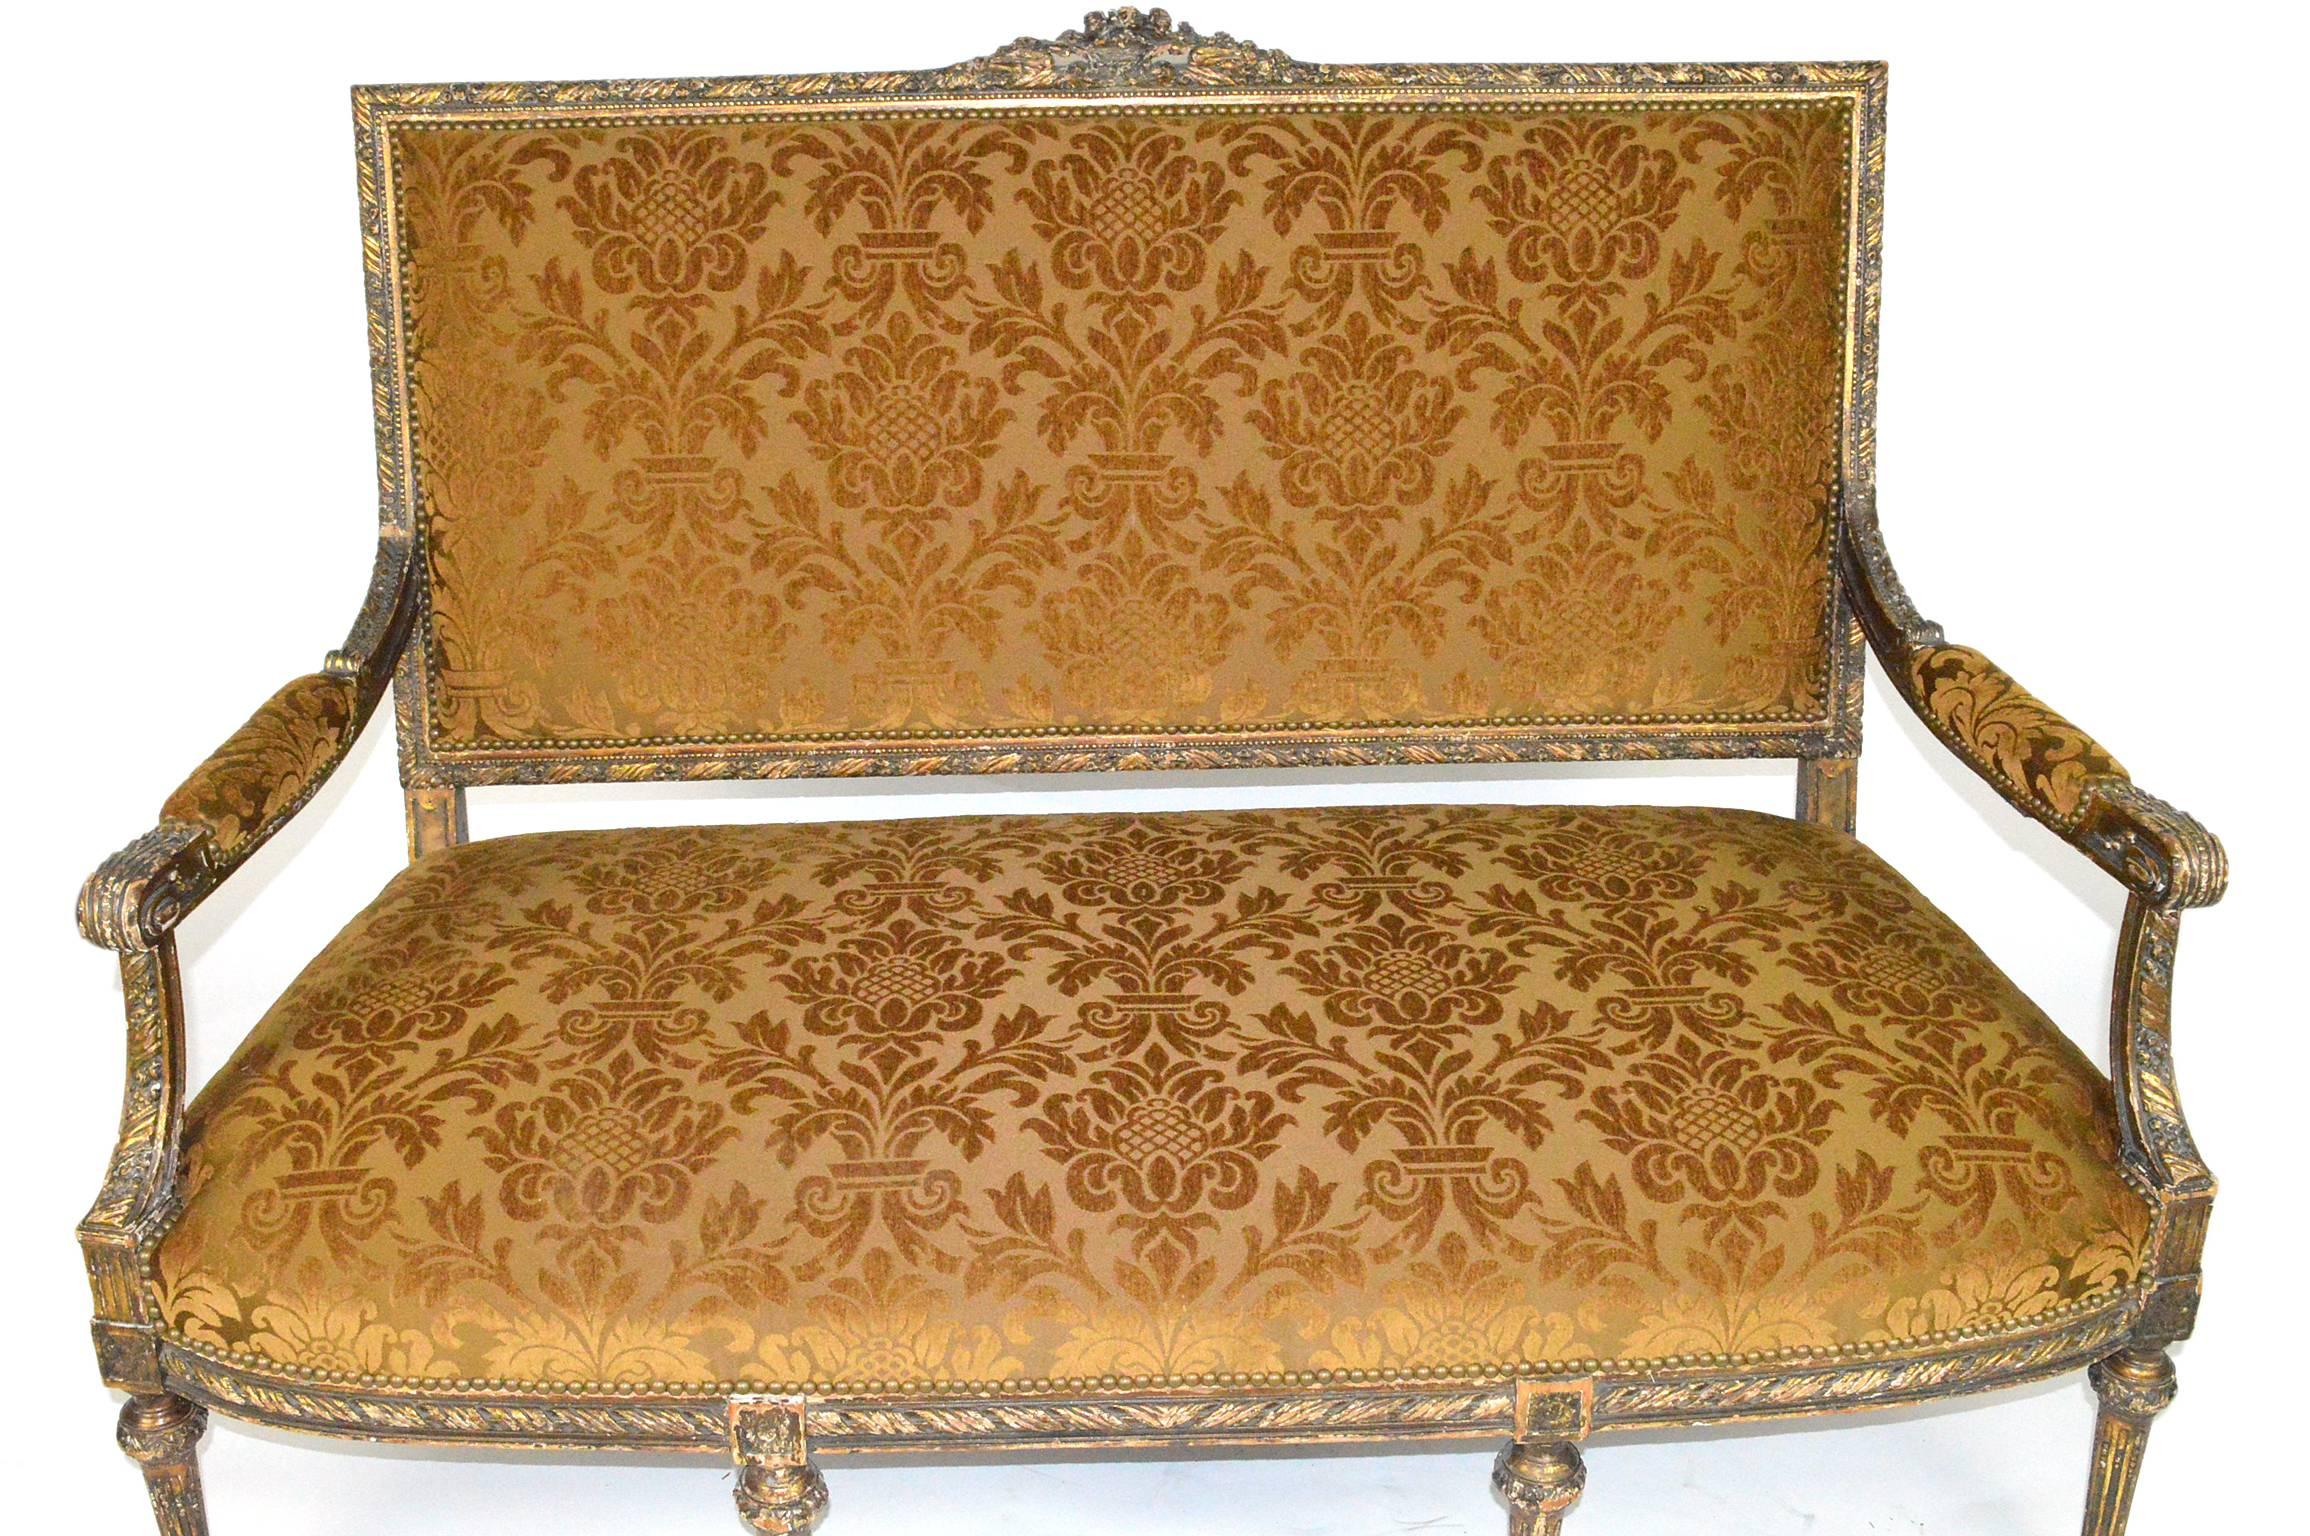 19th century French Louis XVI style carved and painted gilt settee with damask tapestry.